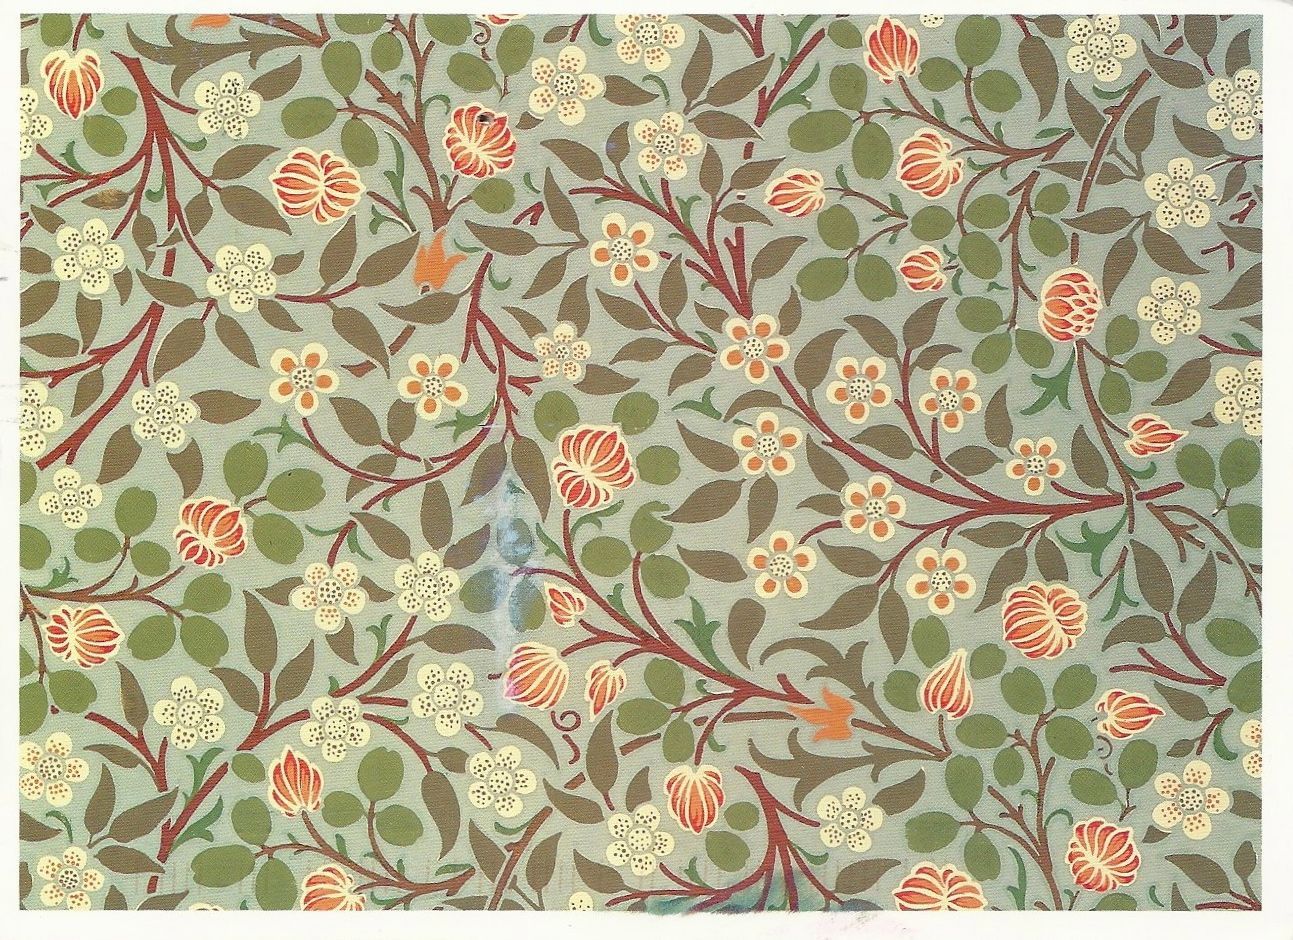 Arts And Crafts Fabric Wallpaper and Home Decor  Spoonflower